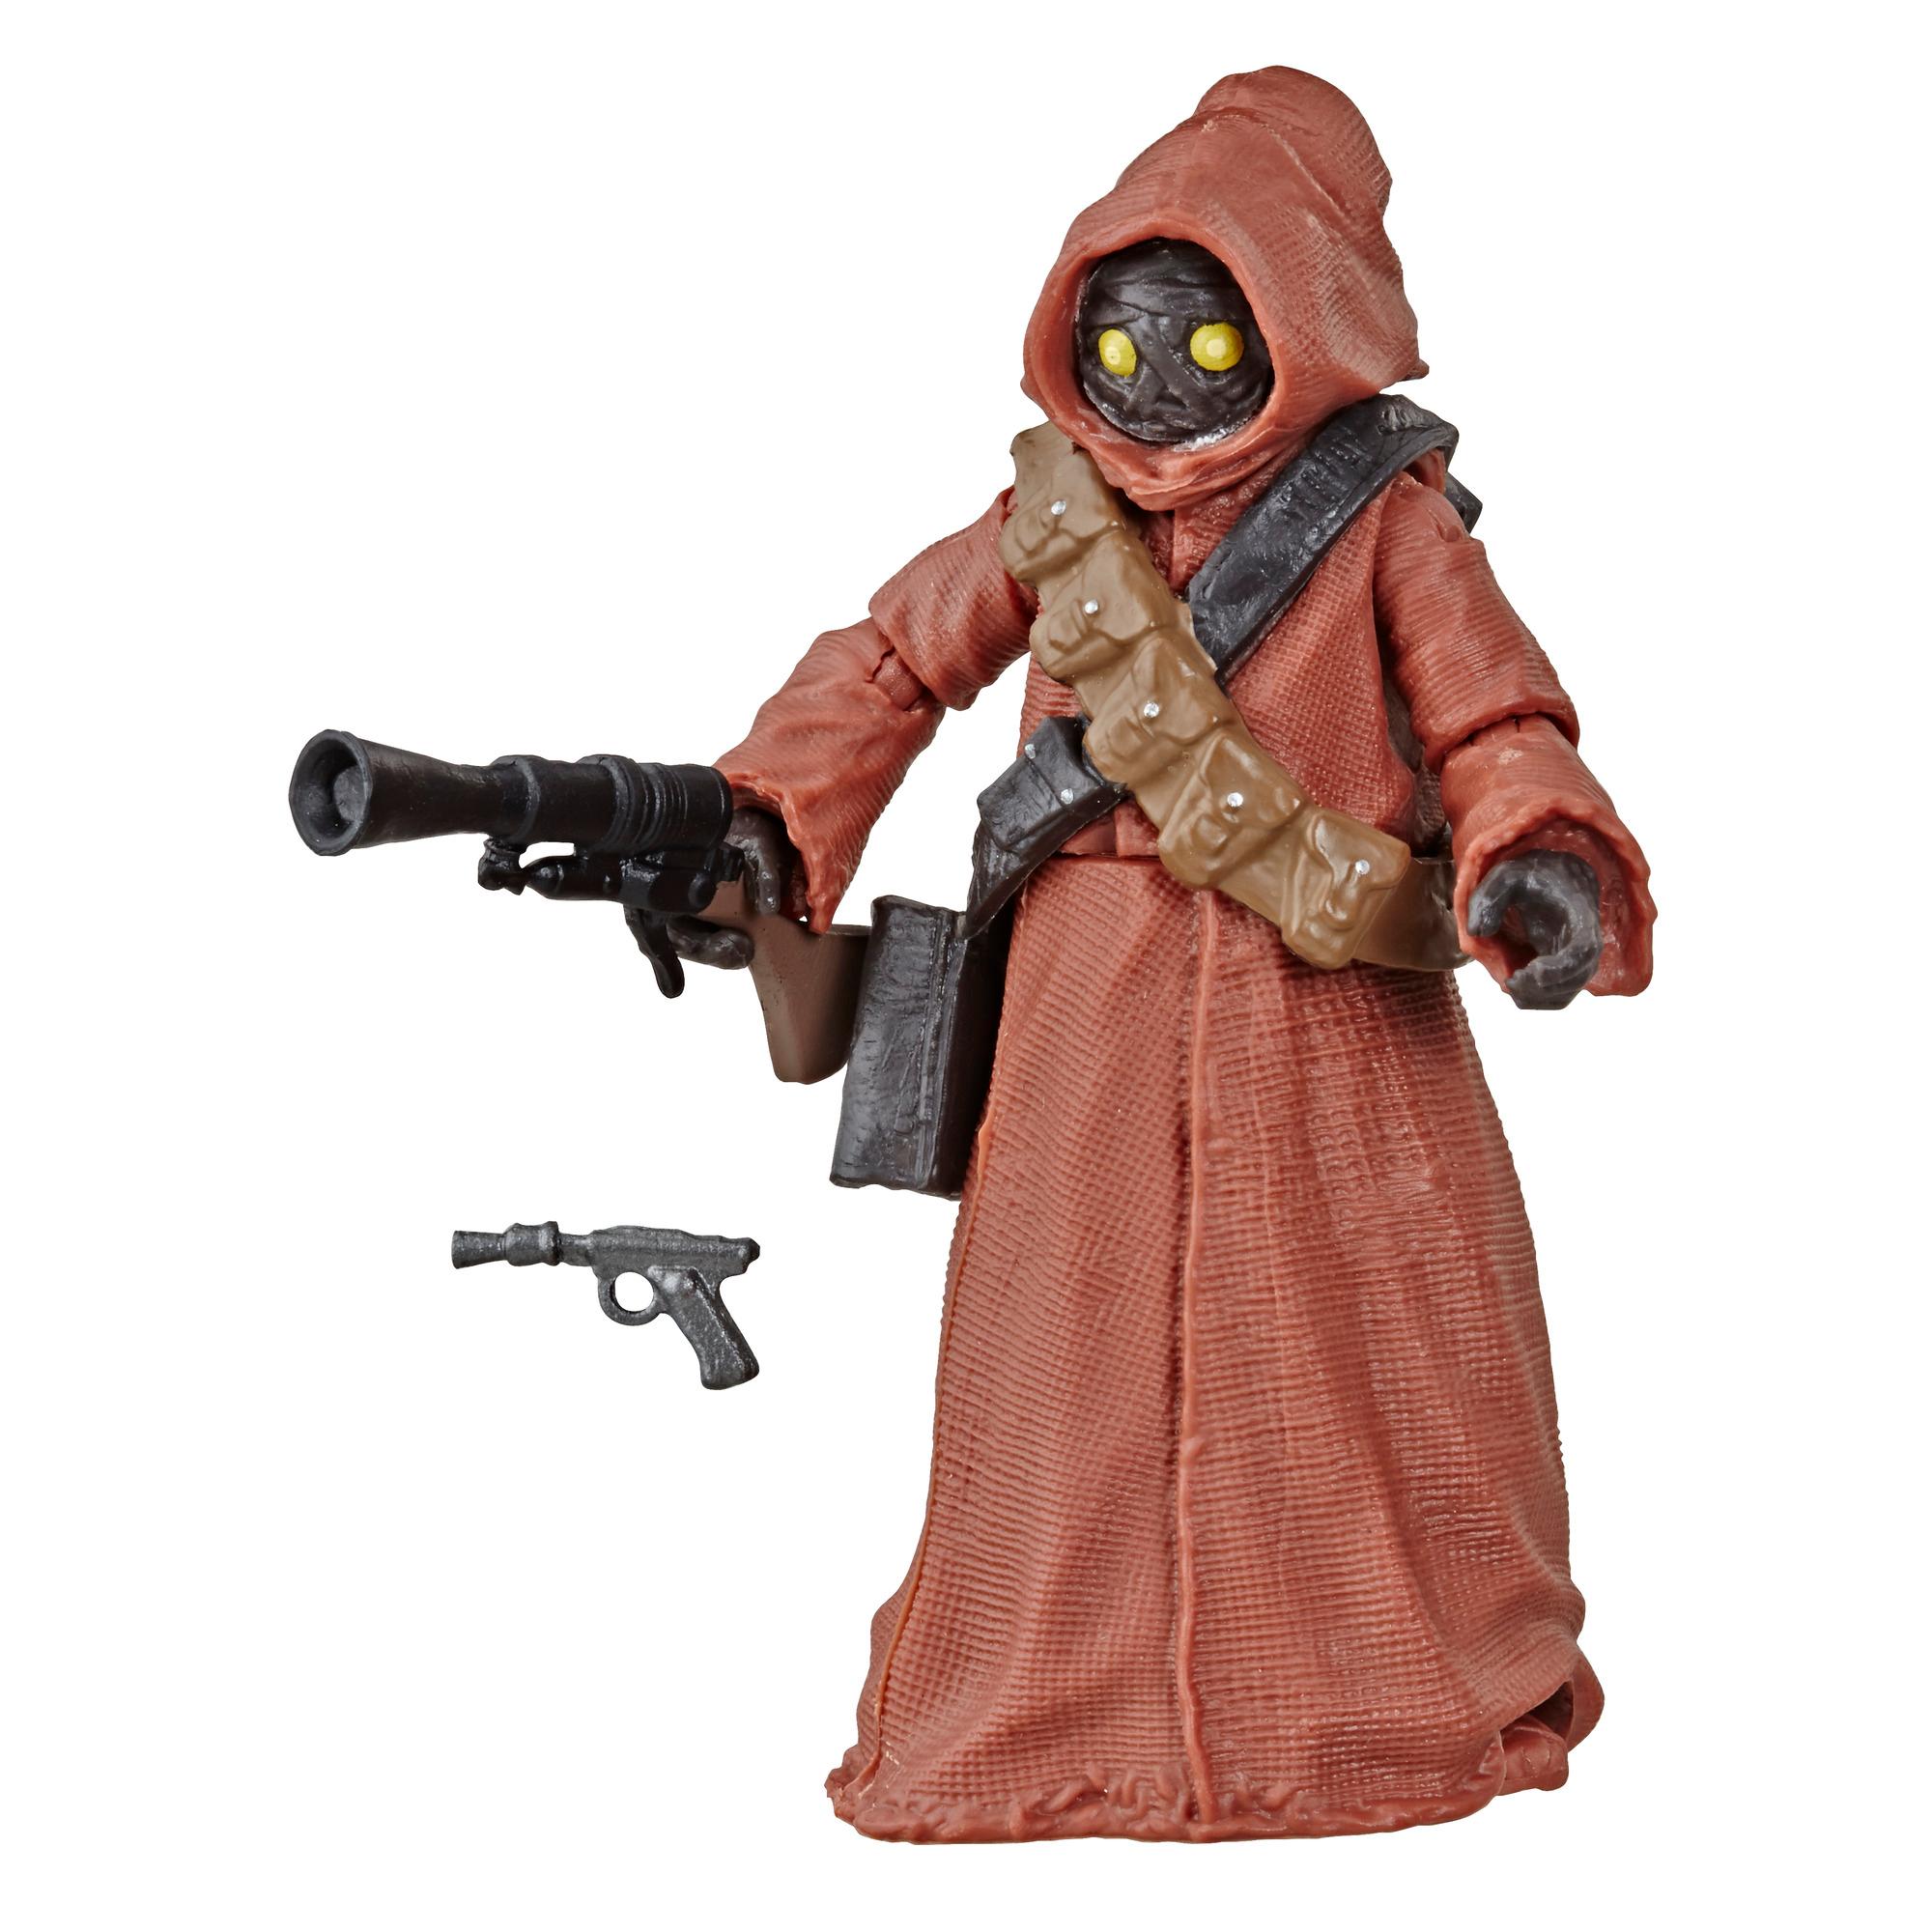 Hasbro Star Wars Kenner The Vintage Collection 3.75" inch Jawa Action Figure 